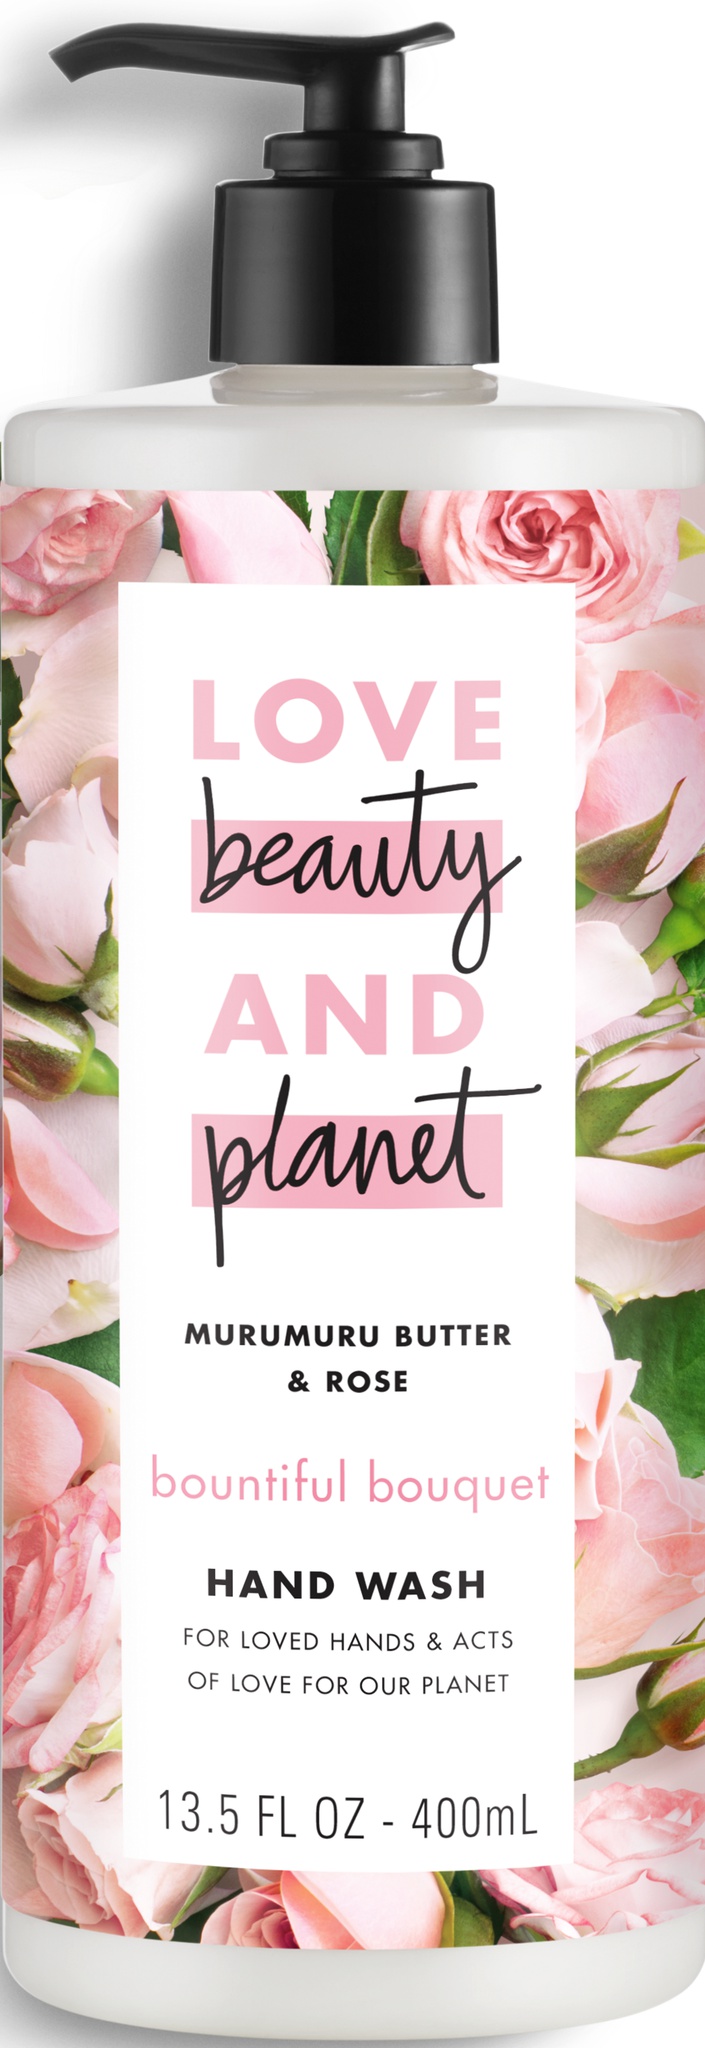 Love beauty and planet Love Beauty & Planet Natural Murumuru Butter & Rose Glow Body Lotion